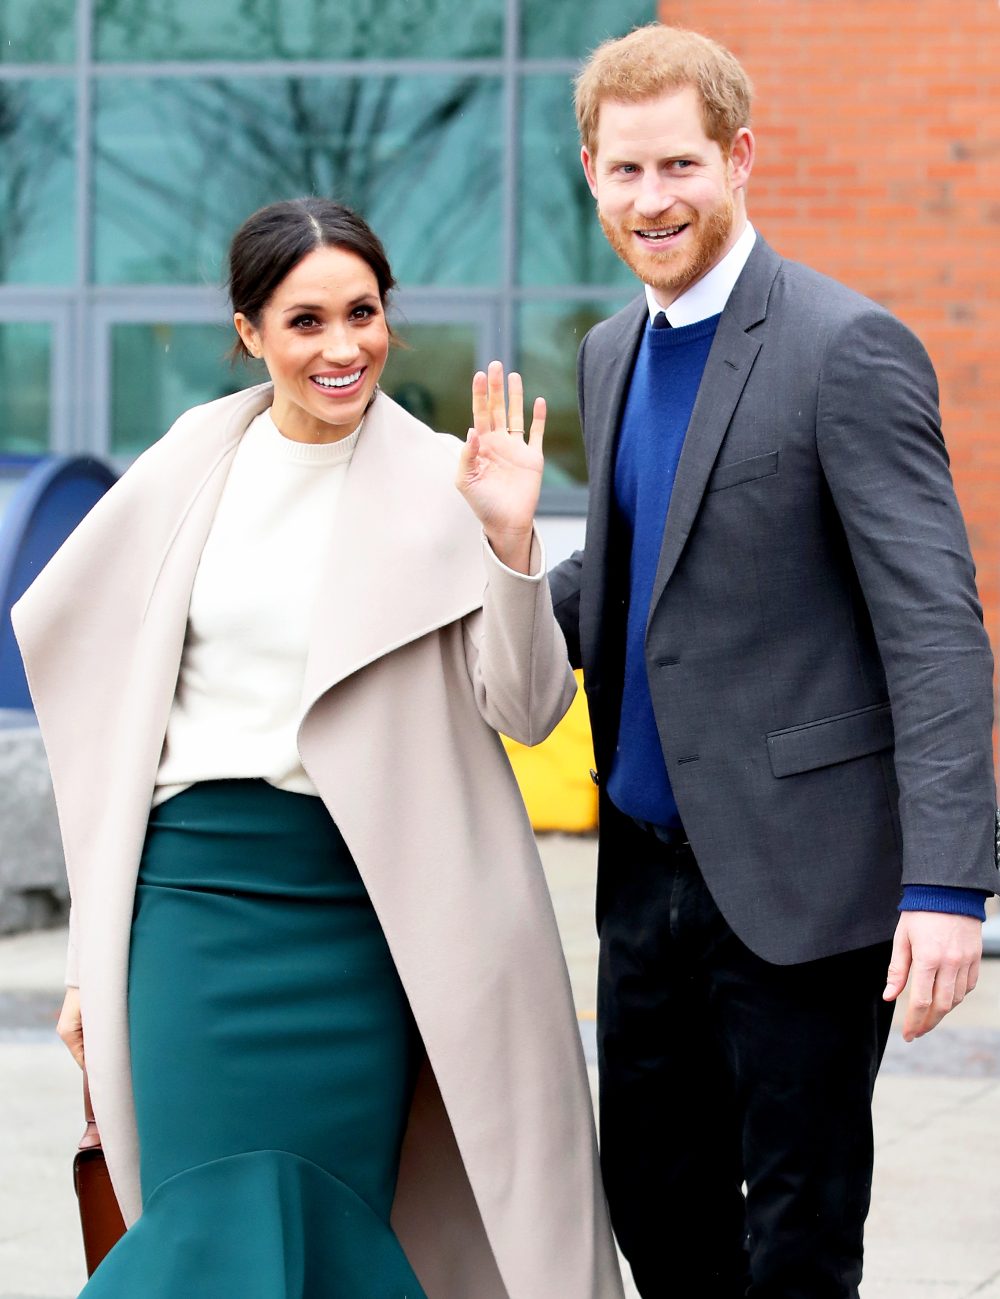 Prince Harry and Meghan Markle depart from Catalyst Inc, Northern Ireland’s next generation science park on March 23, 2018 in Belfast, Nothern Ireland.